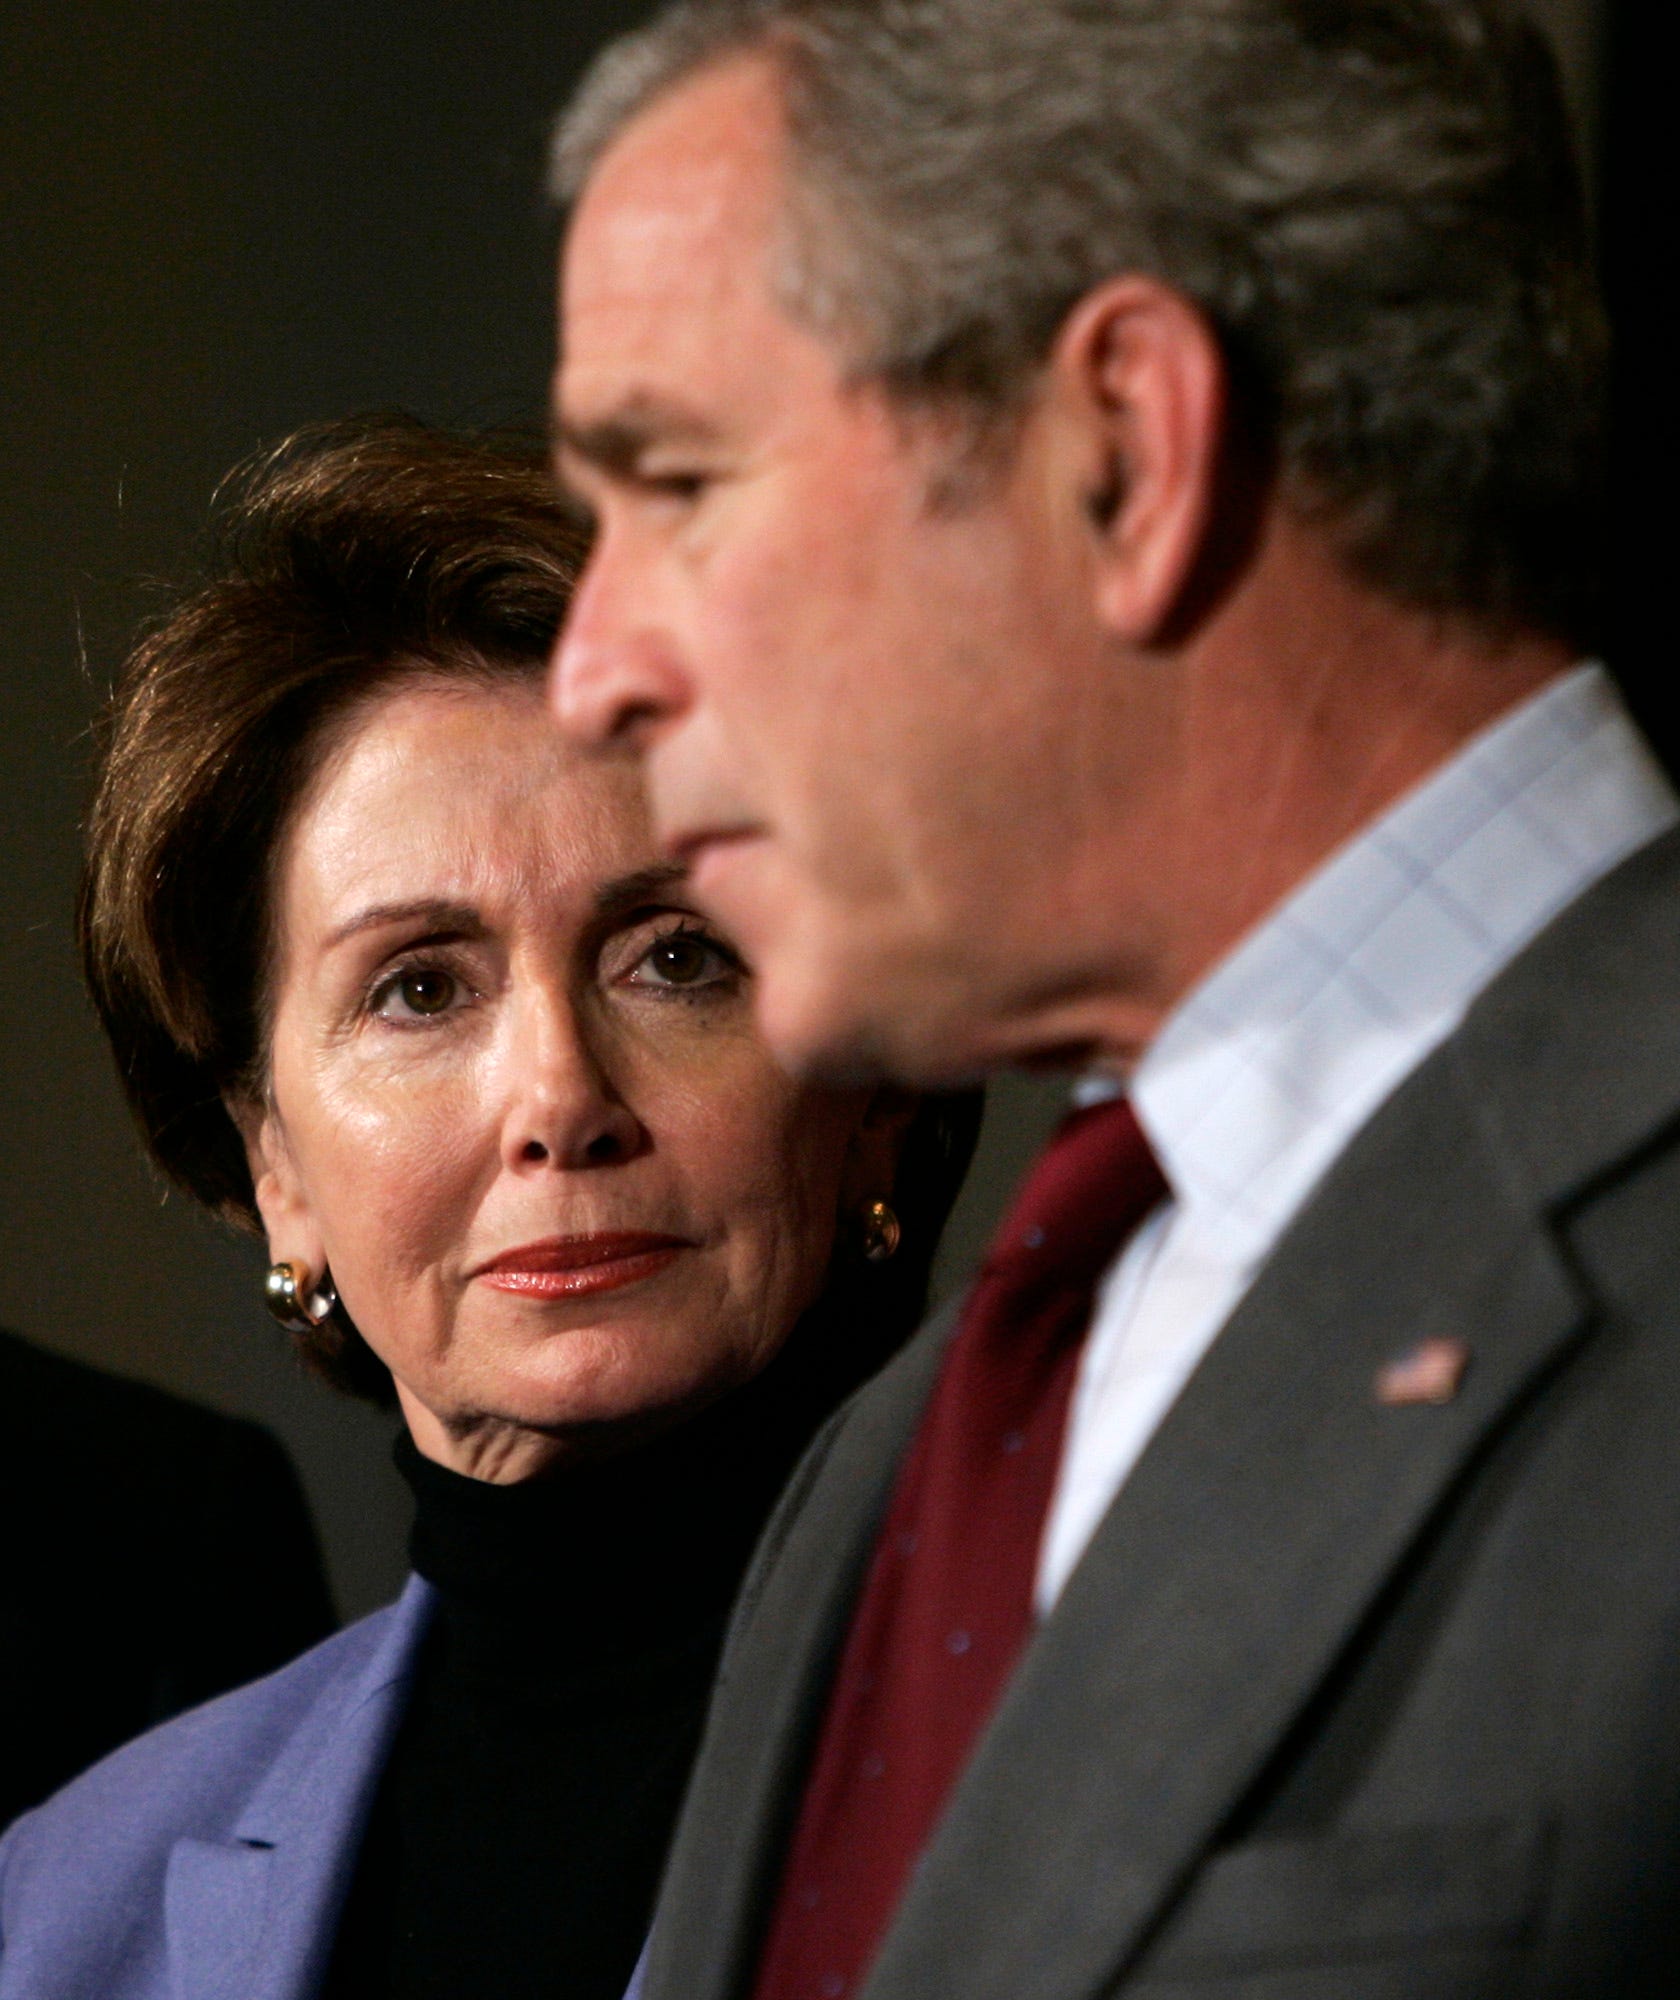 Speaker of the House Rep. Nancy Pelosi, D-Calif., left, looks on as President Bush speaks at the House Democratic Issues Conference on Feb. 3, 2007, in Williamsburg, Va.